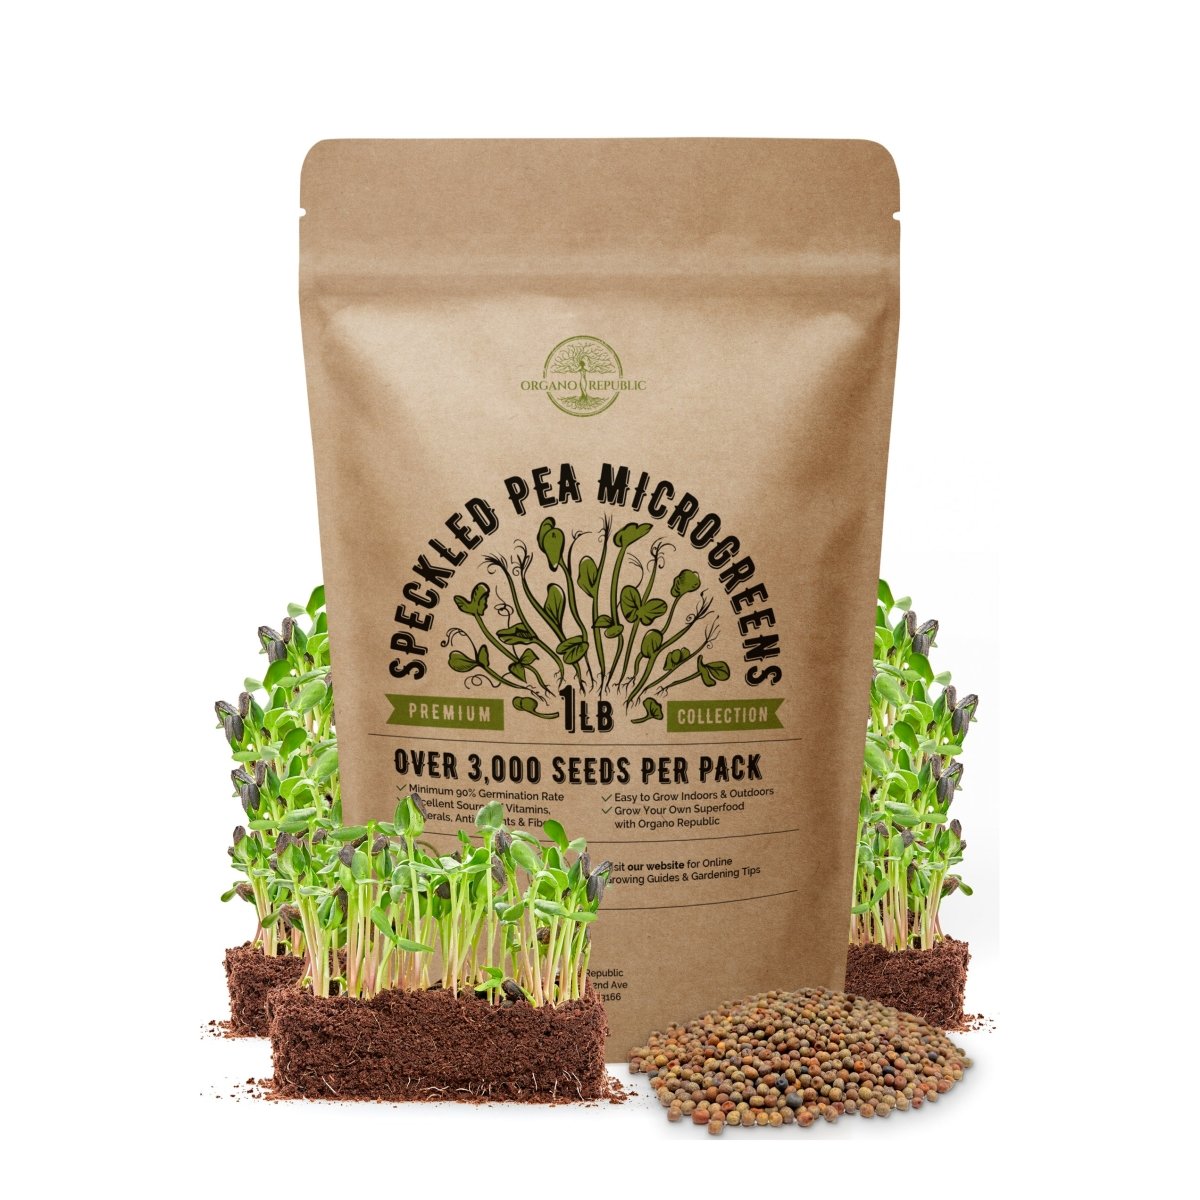 Speckled Pea Sprouting & Microgreens Seeds - Non-GMO, Heirloom Seeds Kit in Bulk 1lb - Organo Republic